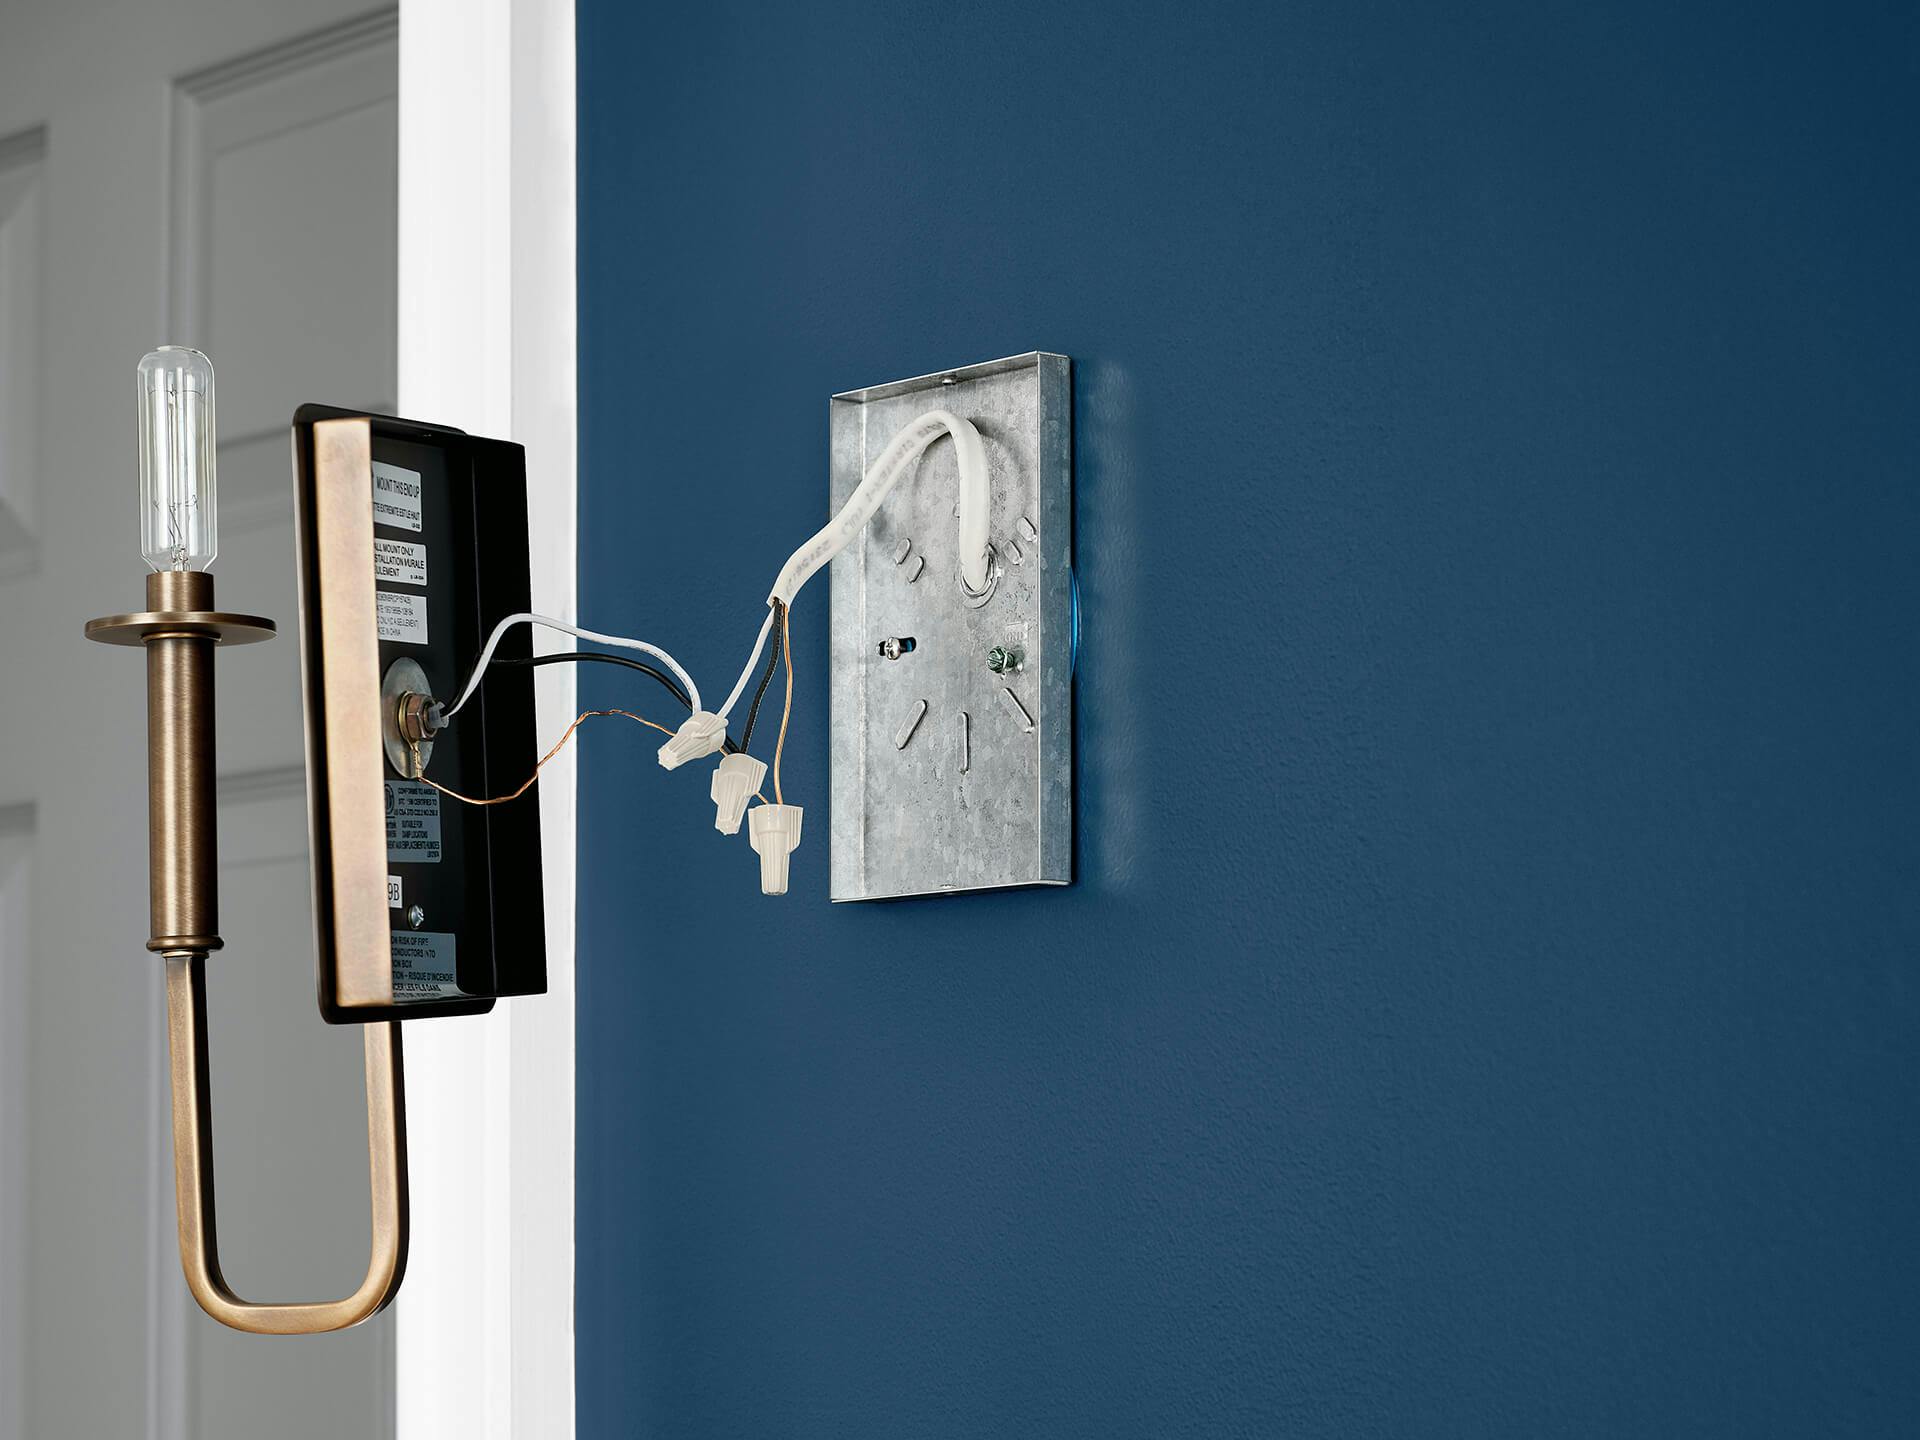 Blue wall with a brass alden sconce's wires connecting with the outlet box wires